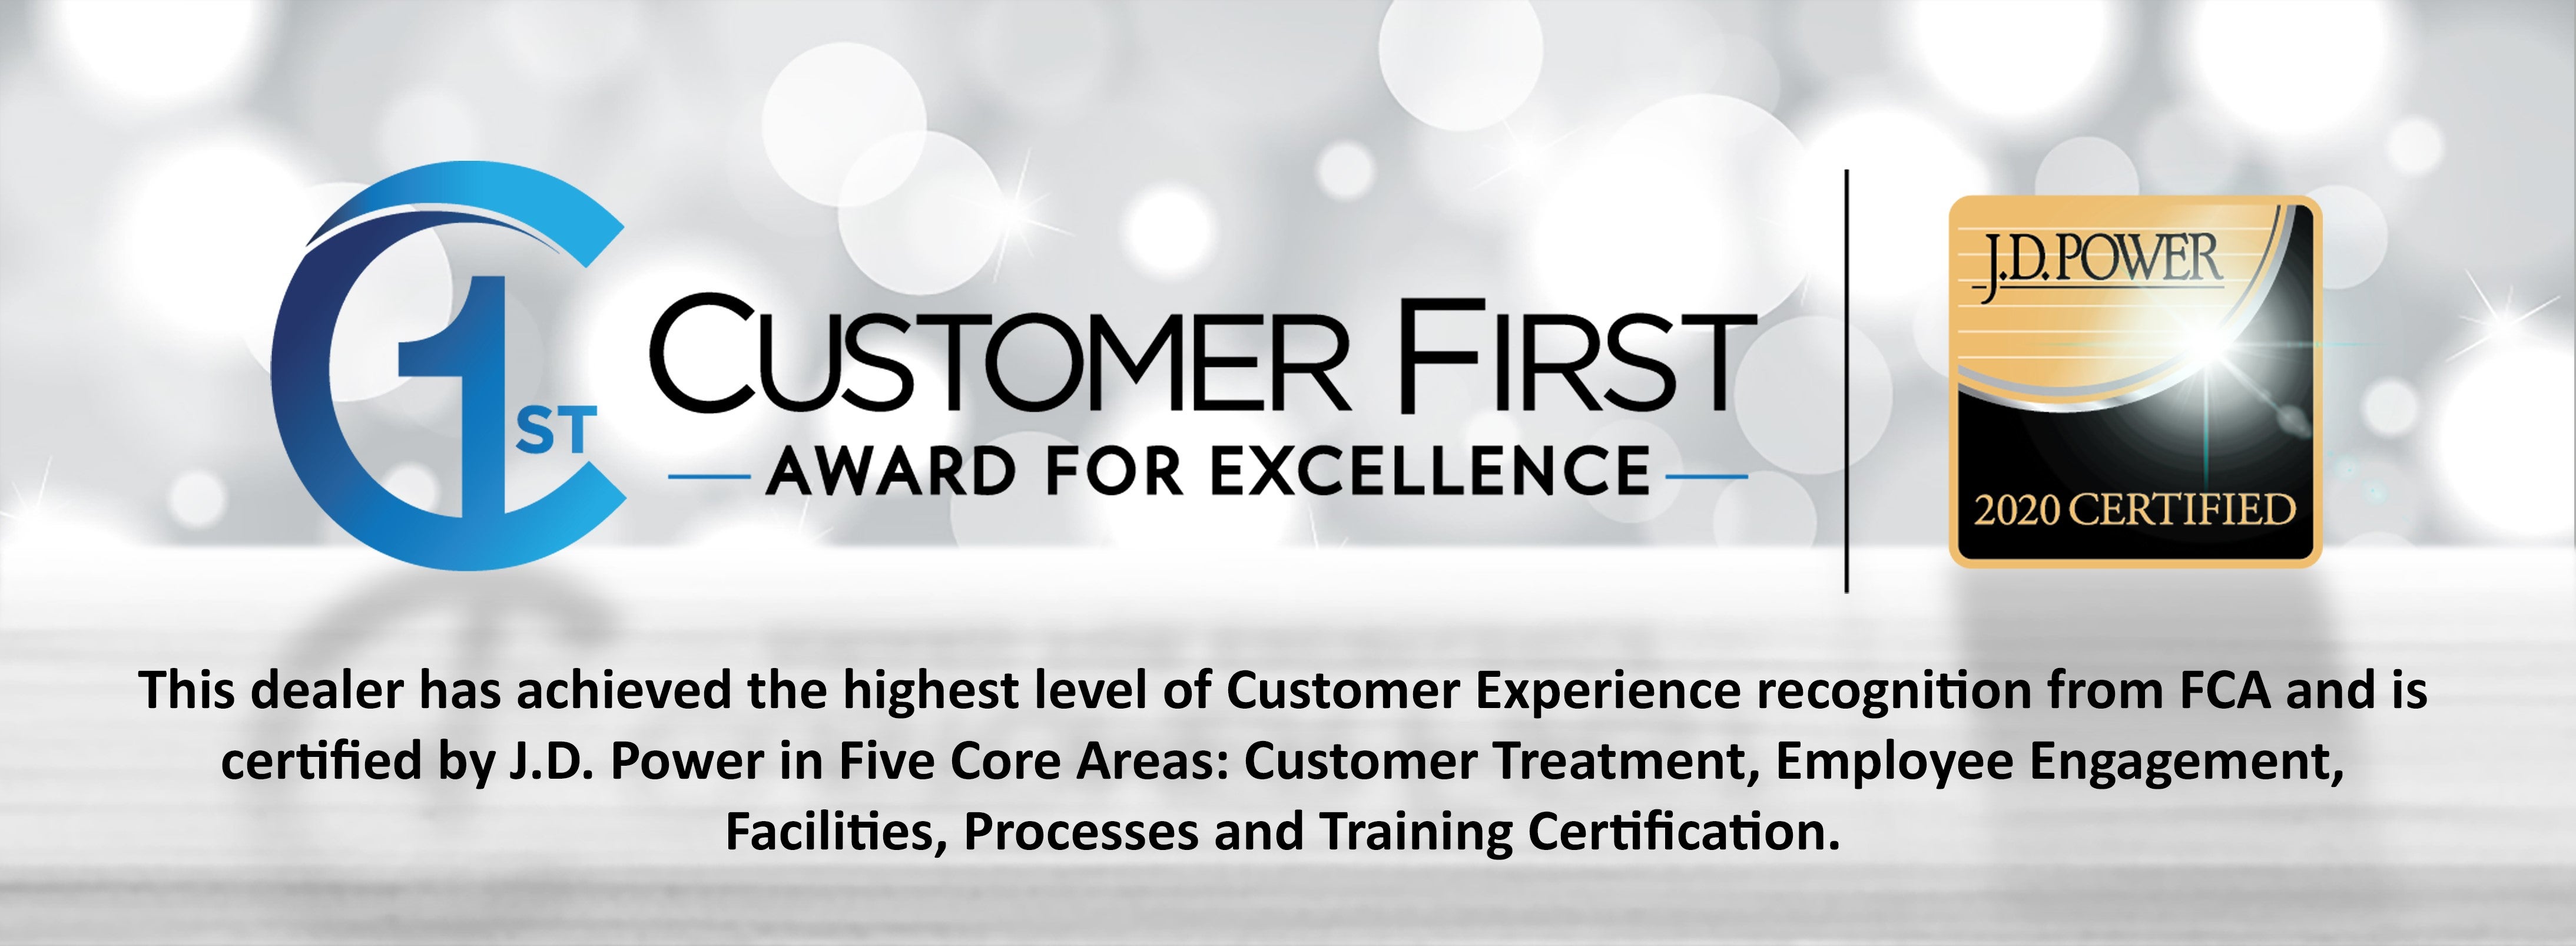 Customer First Award for Excellence for 2019 at Tehrani Motor Company CJDR in Valentine, NE